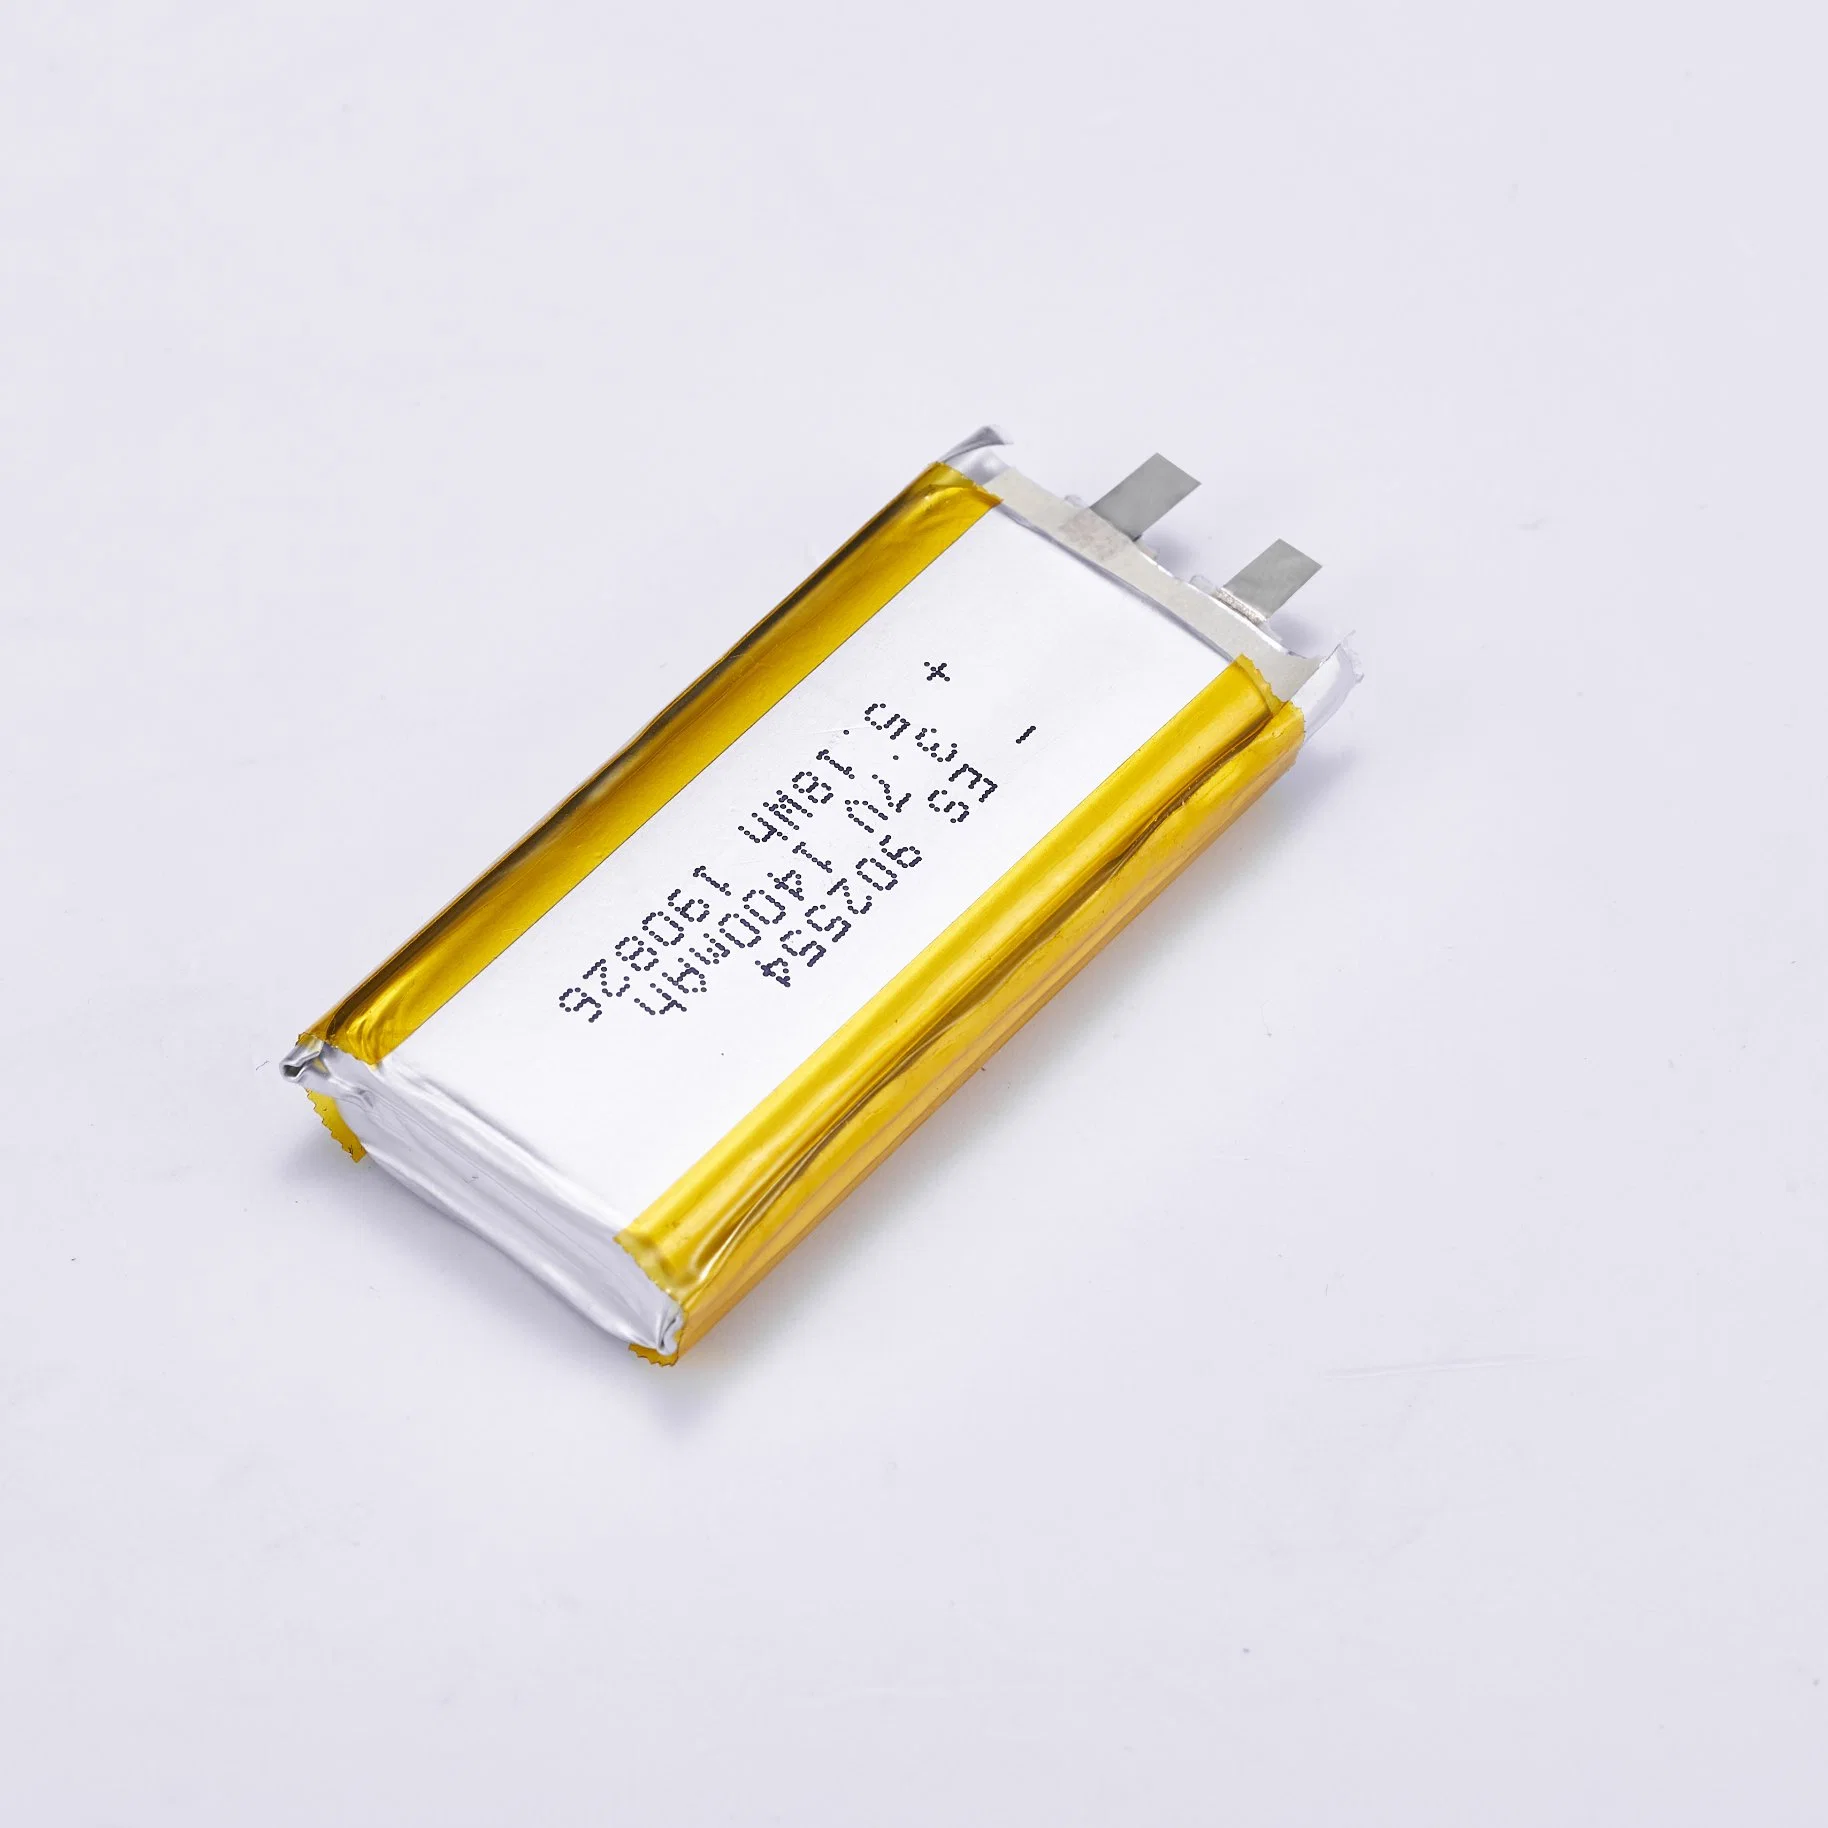 Stable Performance Rechargeable Battery 902554 3.7V Lithium Polymer Battery for Toys